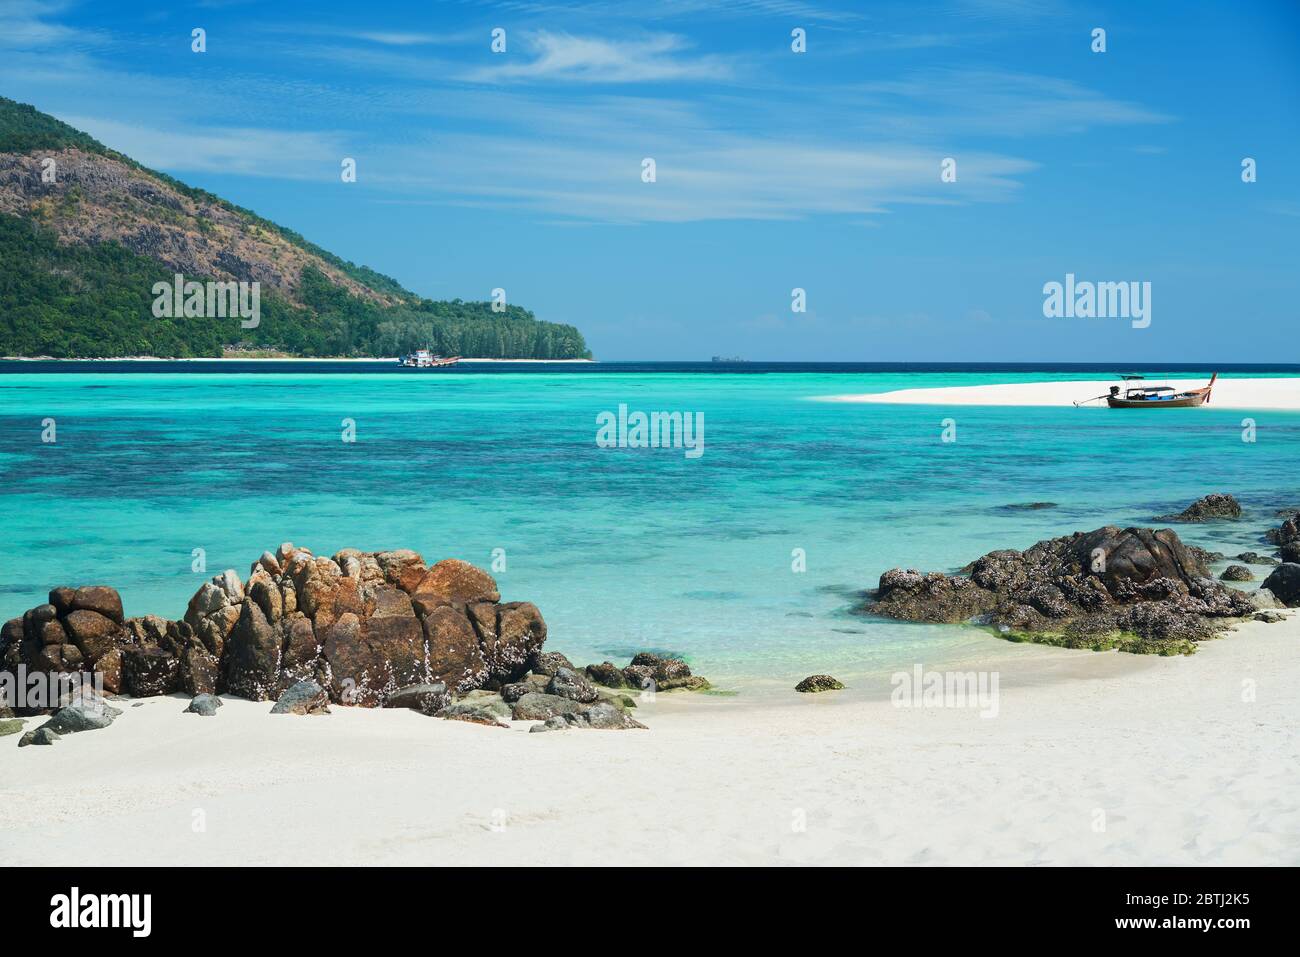 Amazing tropical beach with white sand beach and turquoise sea. Vacation, summer holiday, travel concept Stock Photo